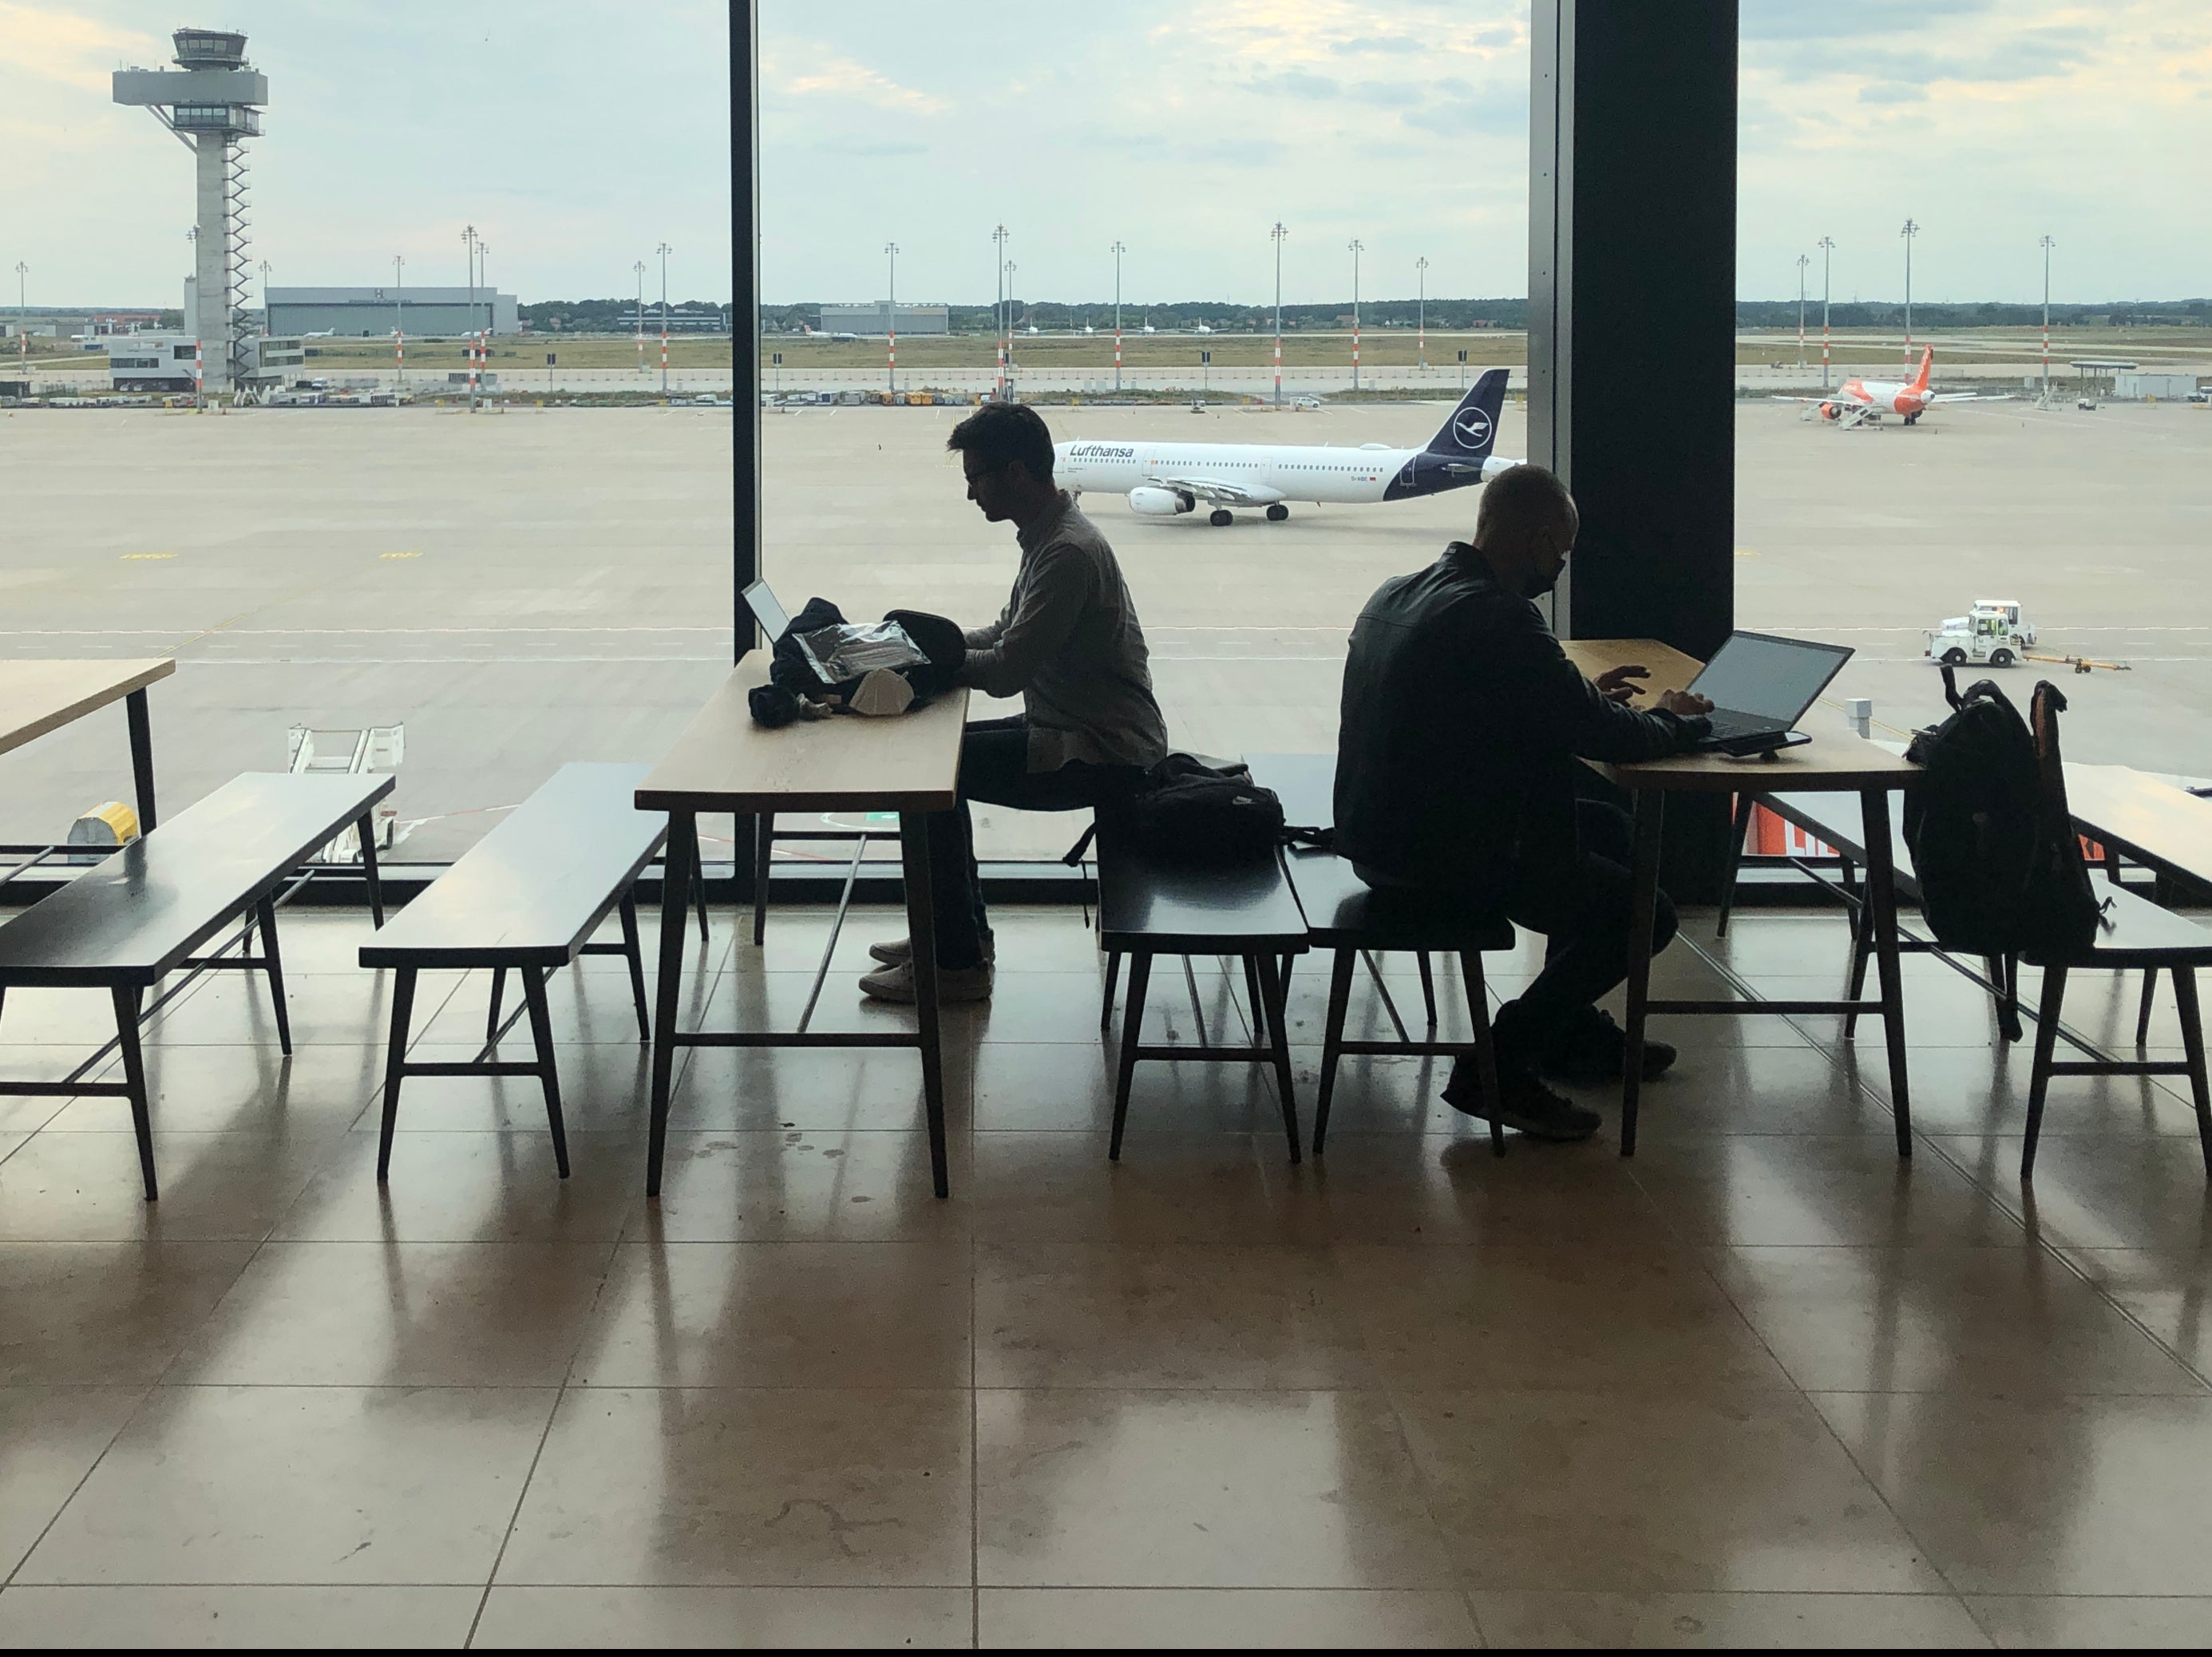 Testing times: Passengers at Berlin airport preparing for a flight to the UK